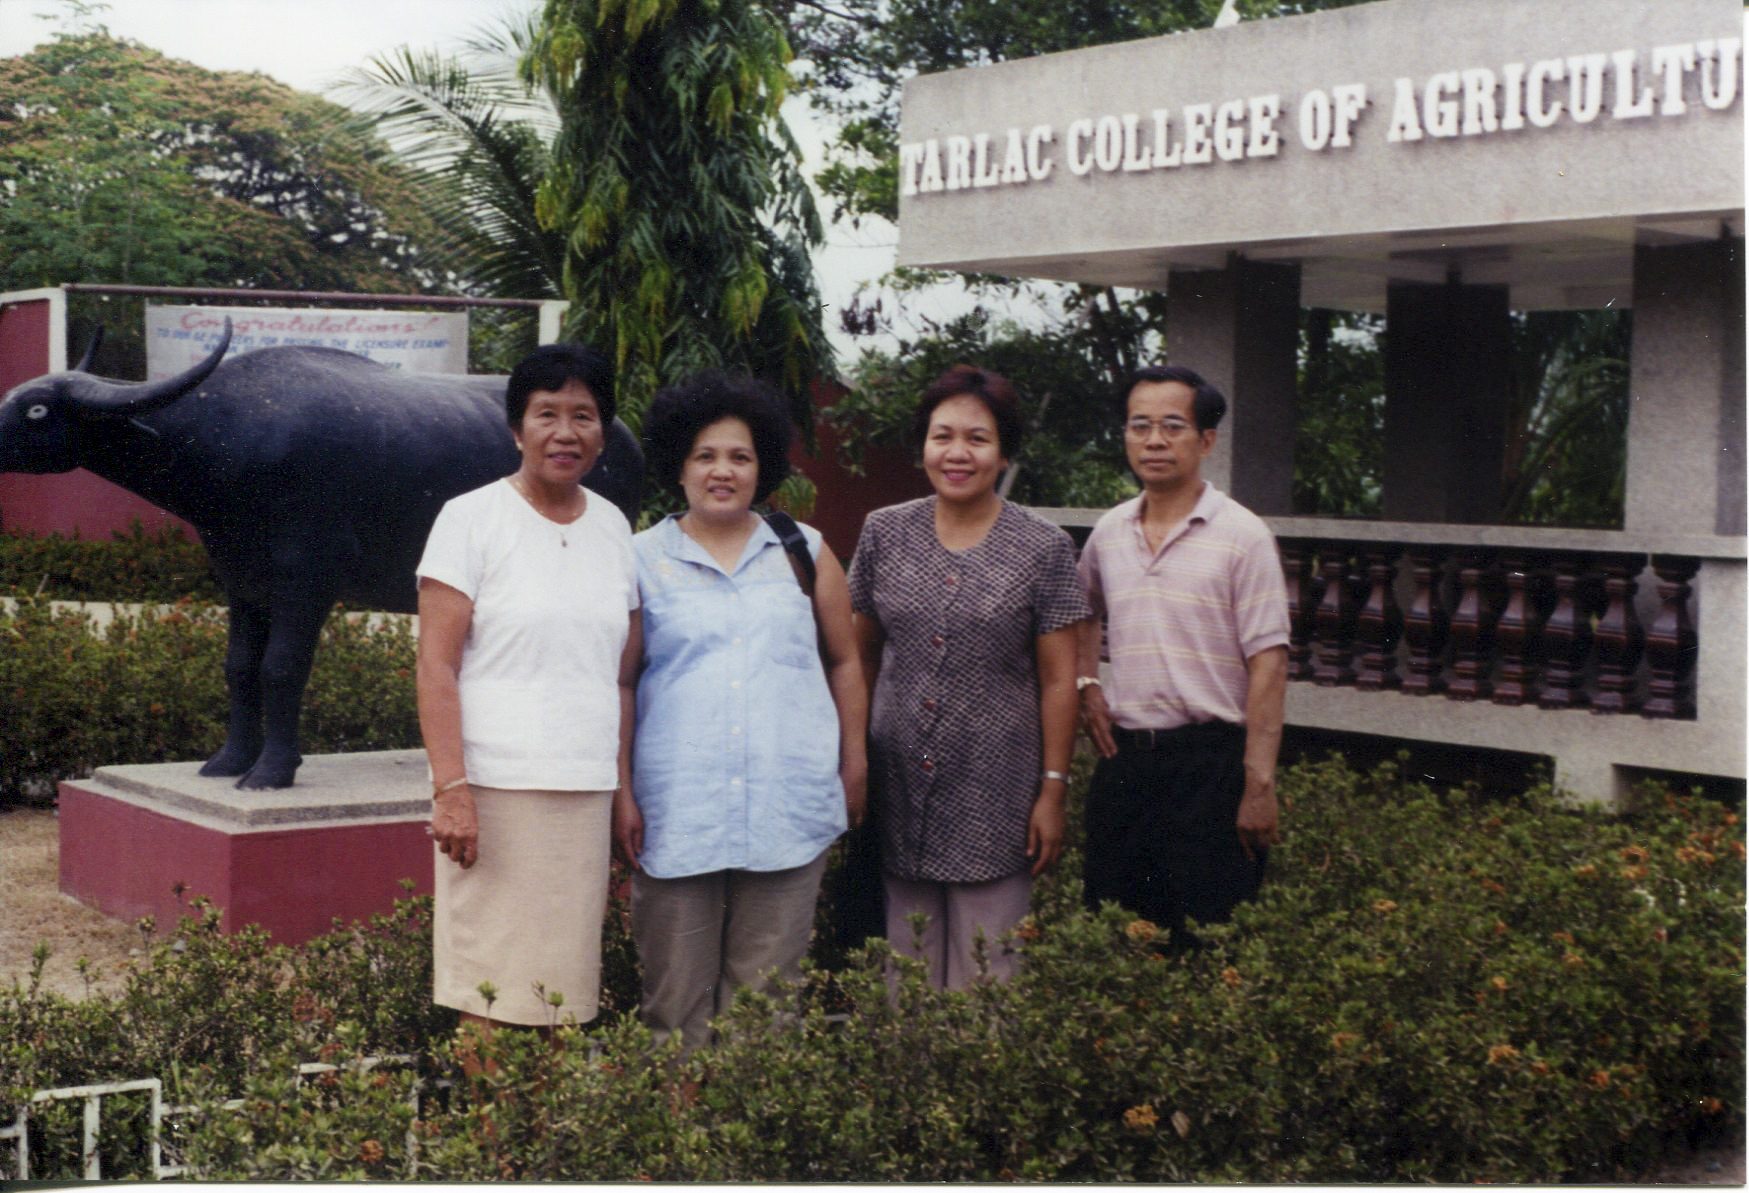 Photo of Carnate, wife, and friends, 1960's
Taken in the 1960's at Tarlac College of Agriculture (1st high school, attended one year; opened up schooling for him)- acquired while visiting Philippines. 
Left to right: friend/teacher, wife Olivia, friend, Orlando. 

Any views, findings, conclusions, or recommendations expressed in this story do not necessarily represent those of the National Endowment for the Humanities. (c) Field Museum of Natural History - CC BY-NC 4.0